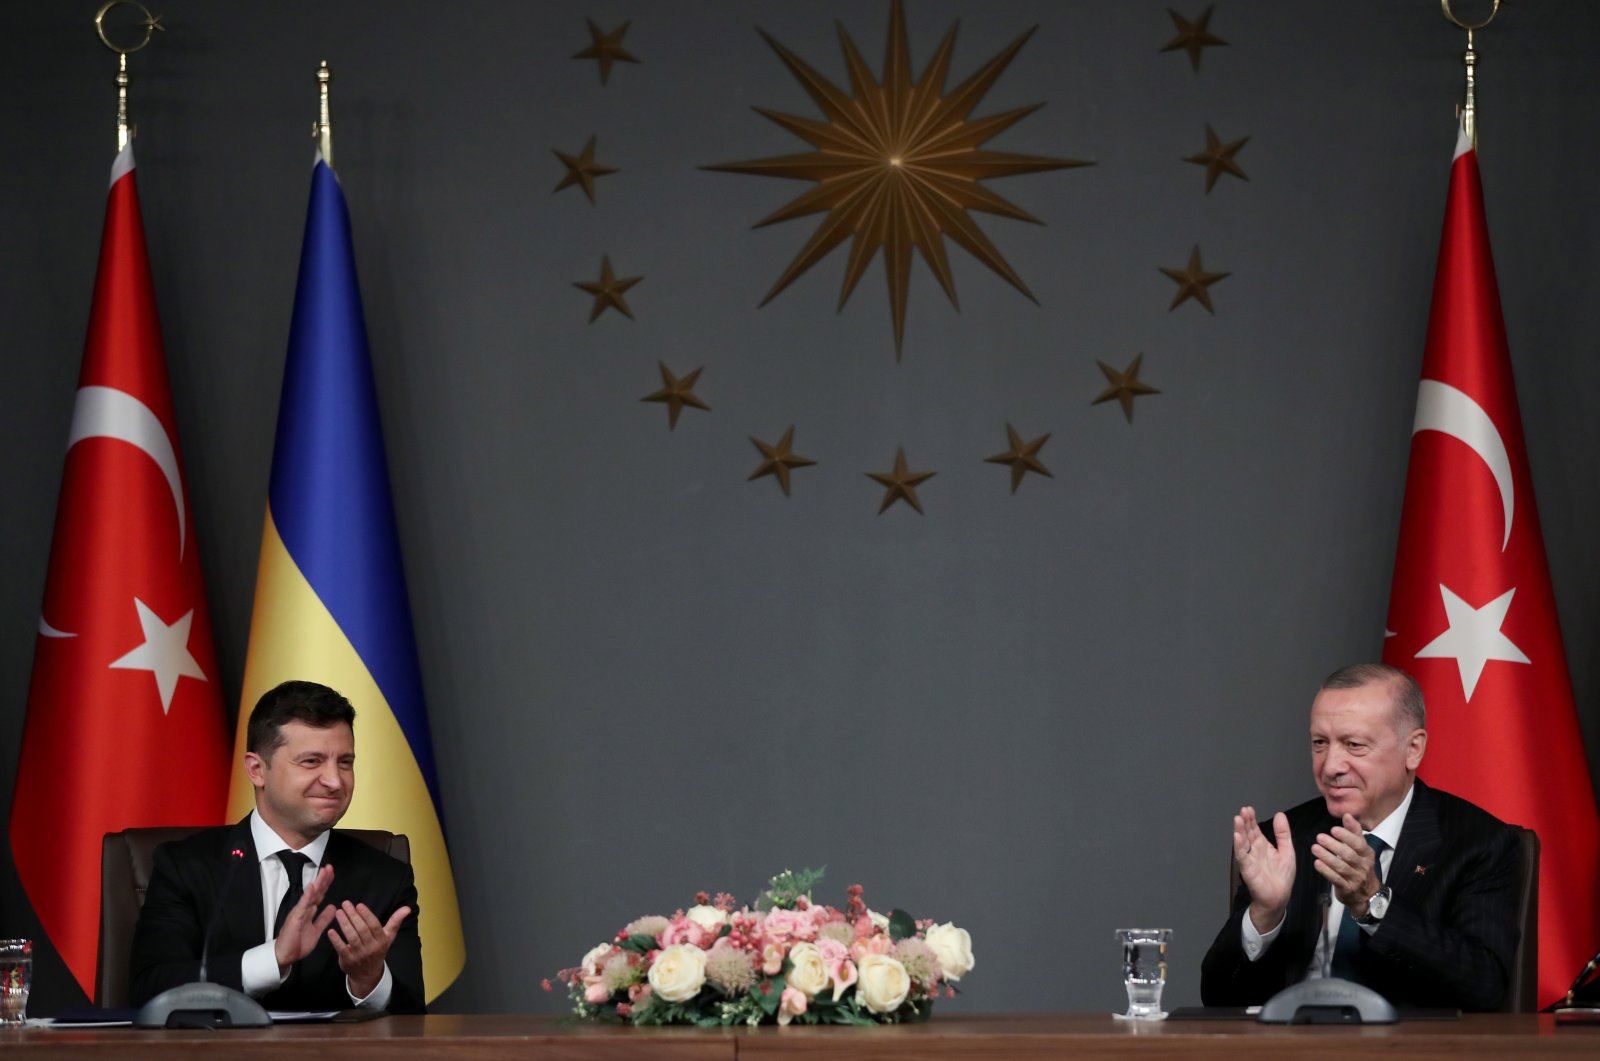 Ukrainian, Turkish presidents to discuss recognition of so-called "DNR", "LNR" by Russia